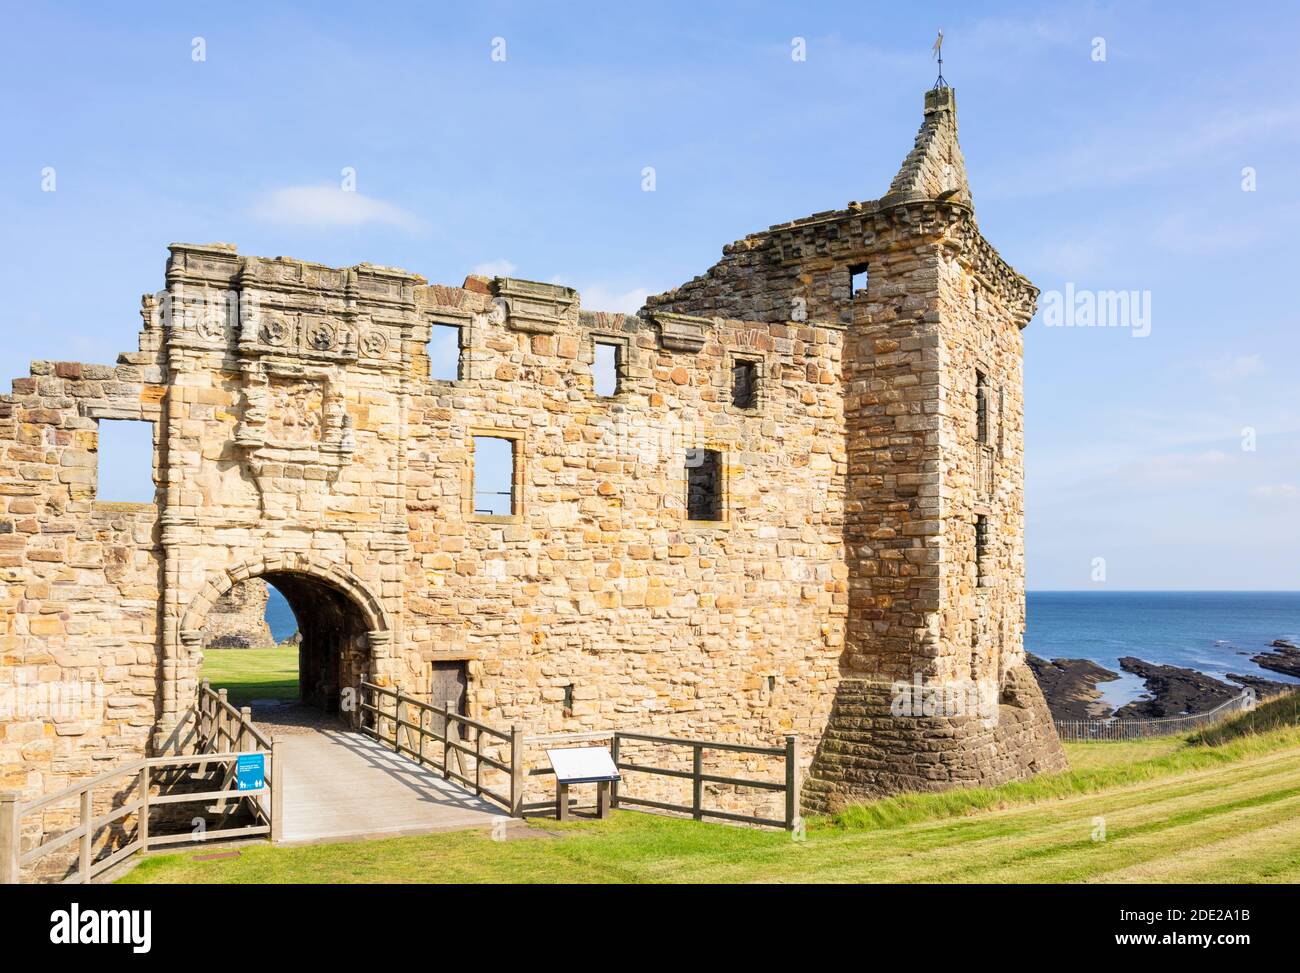 St Andrews Scotland St Andrews Castle a picturesque ruin in the coastal Royal Burgh of St Andrews Fife Scotland UK GB Europe Stock Photo